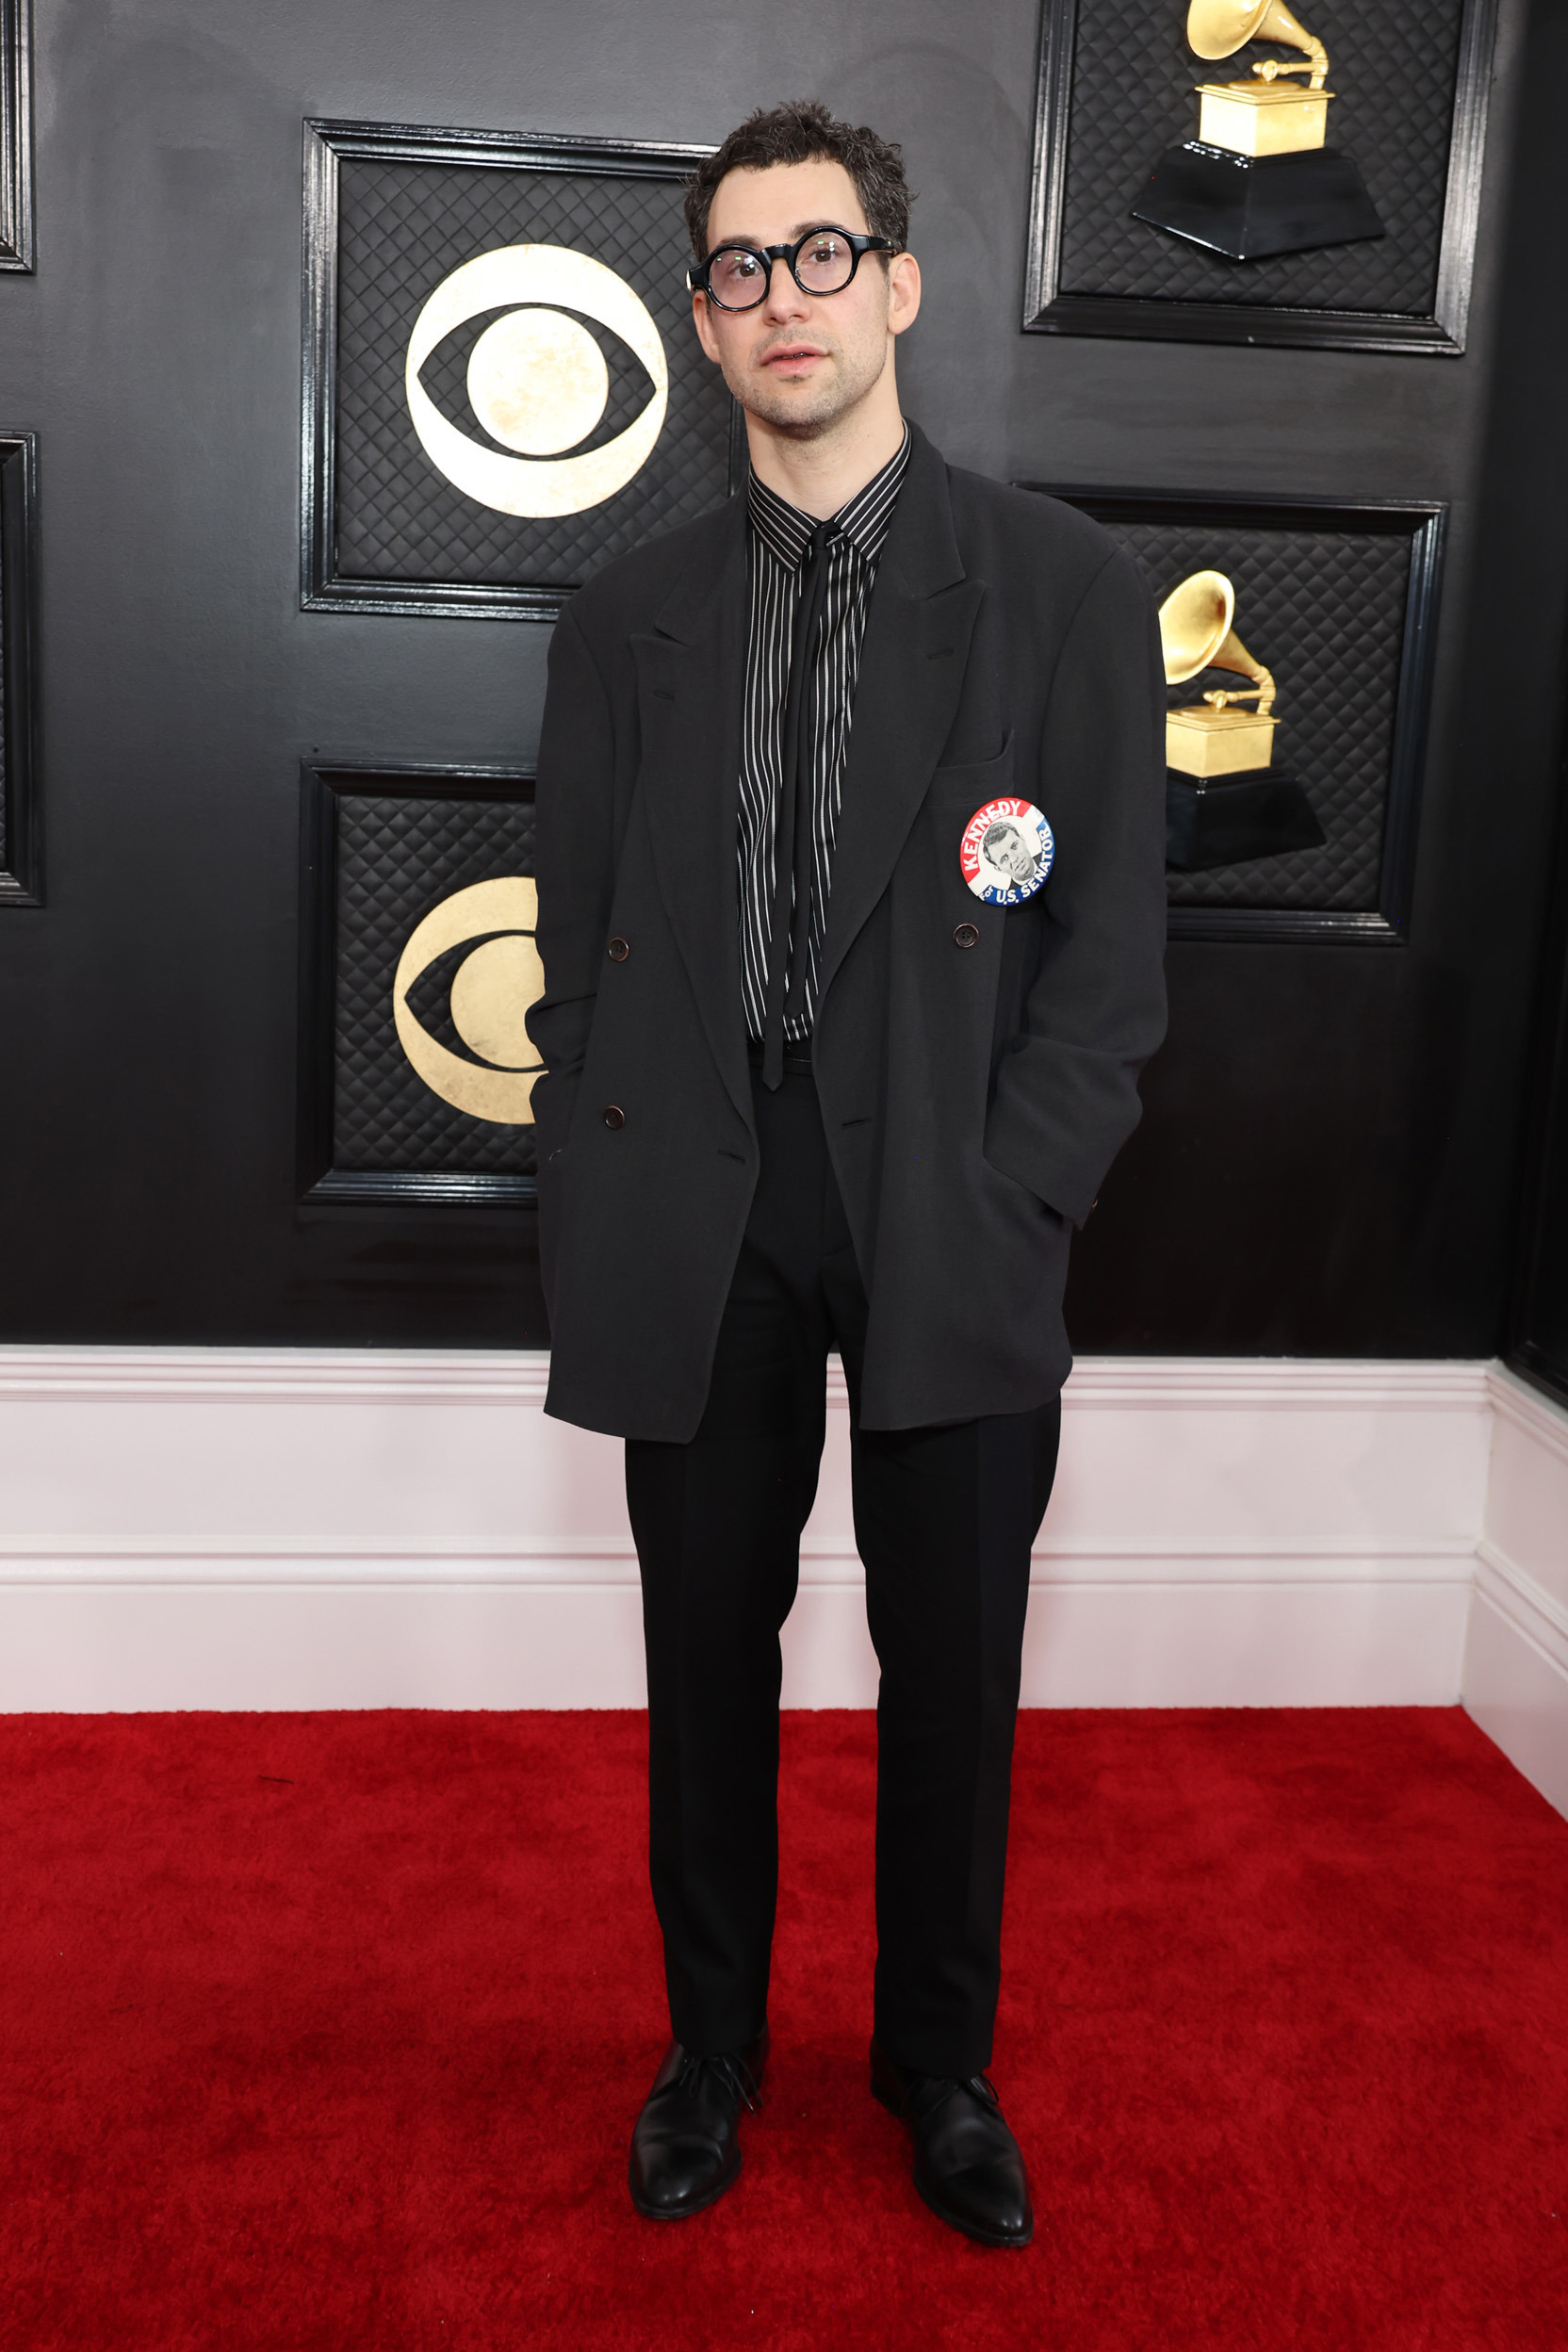 Jack Antonoff at the 65th Grammy Awards on February 5, 2023 in Los Angeles, California.